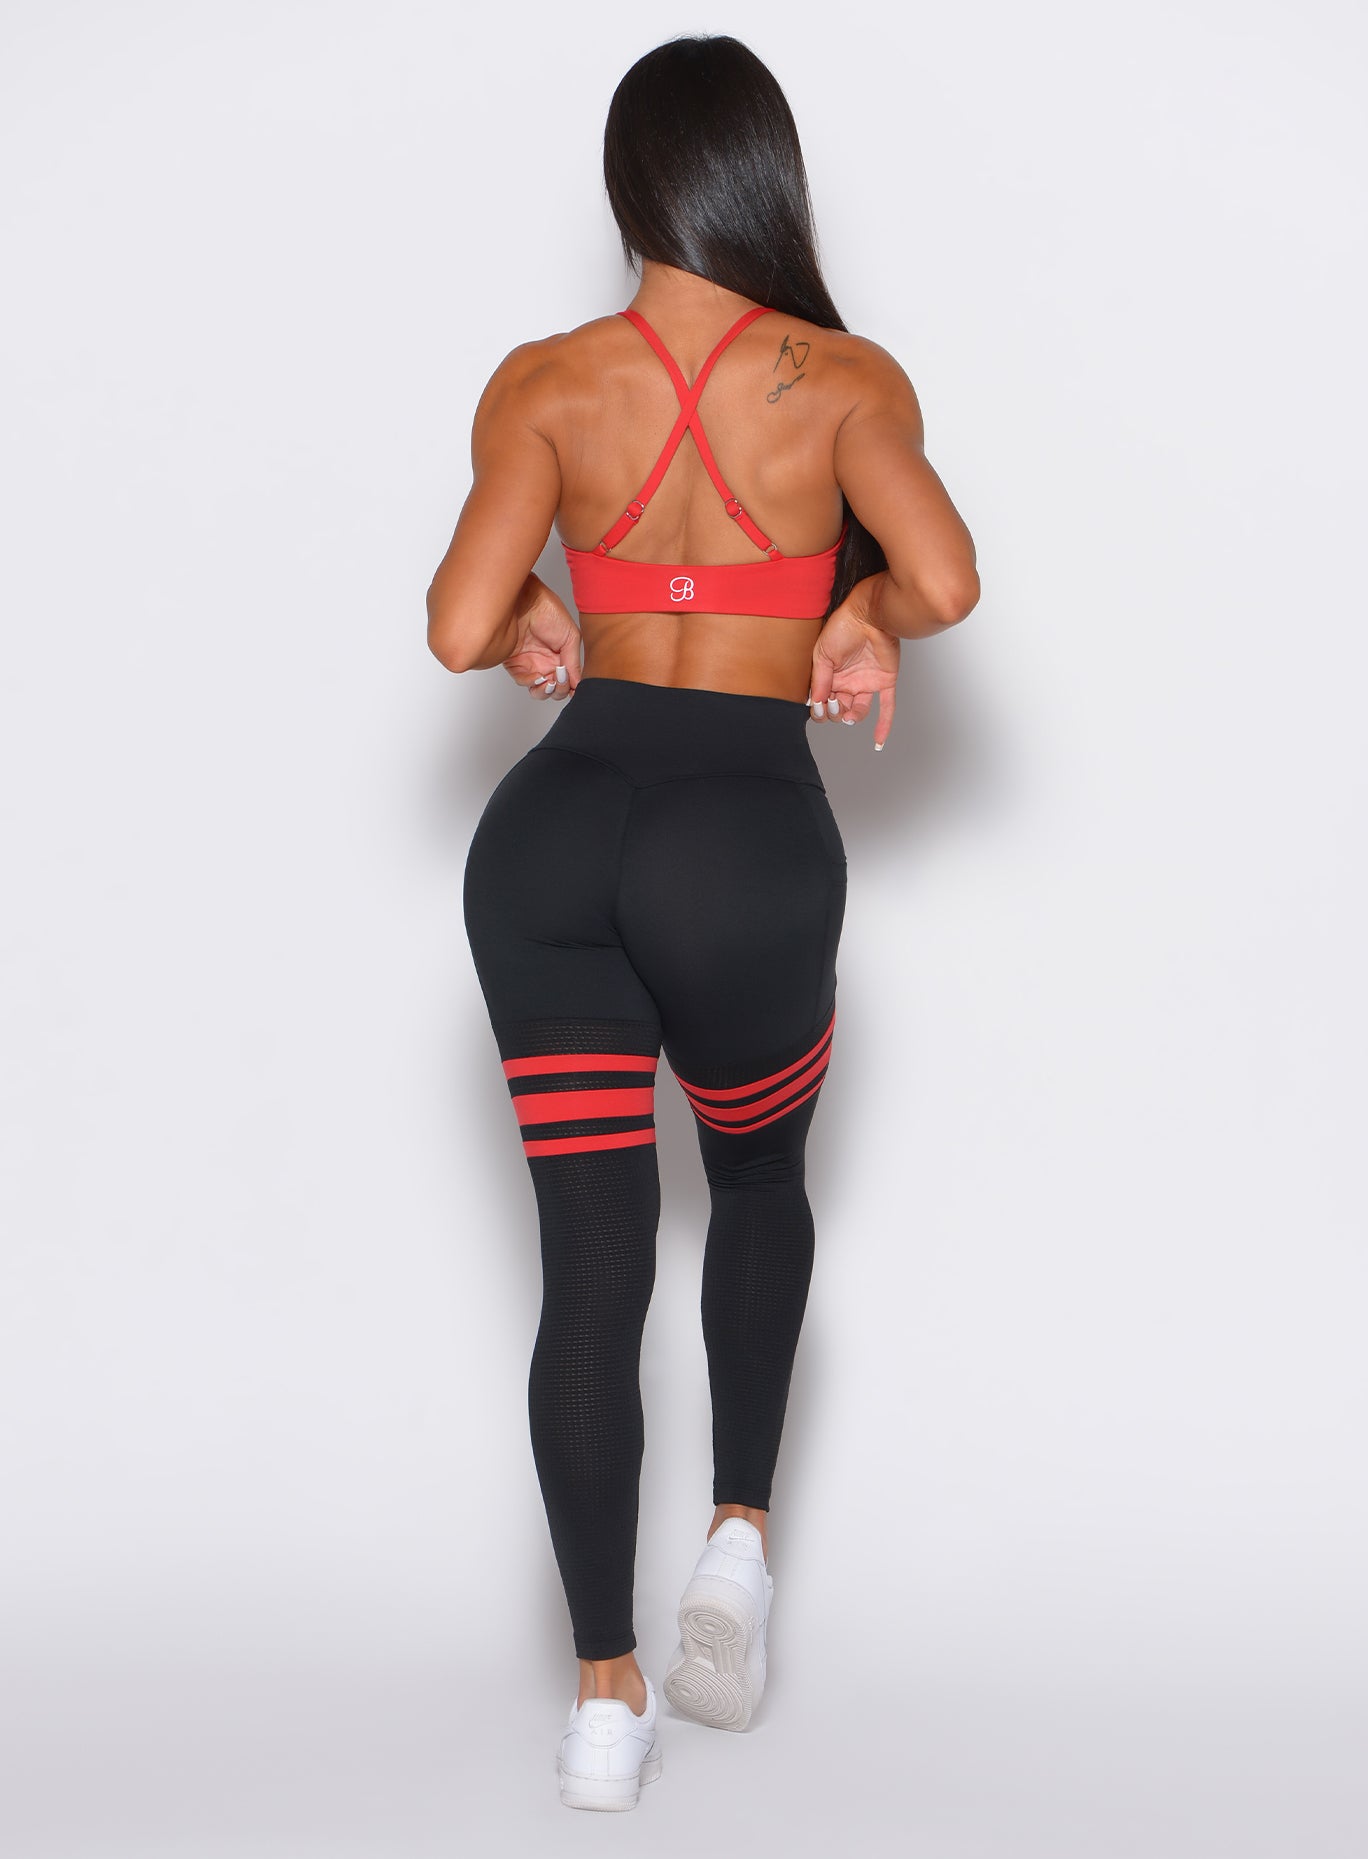 Back profile view of a model wearing the Perform Thigh Highs in Black Fire color  along with a matching bra